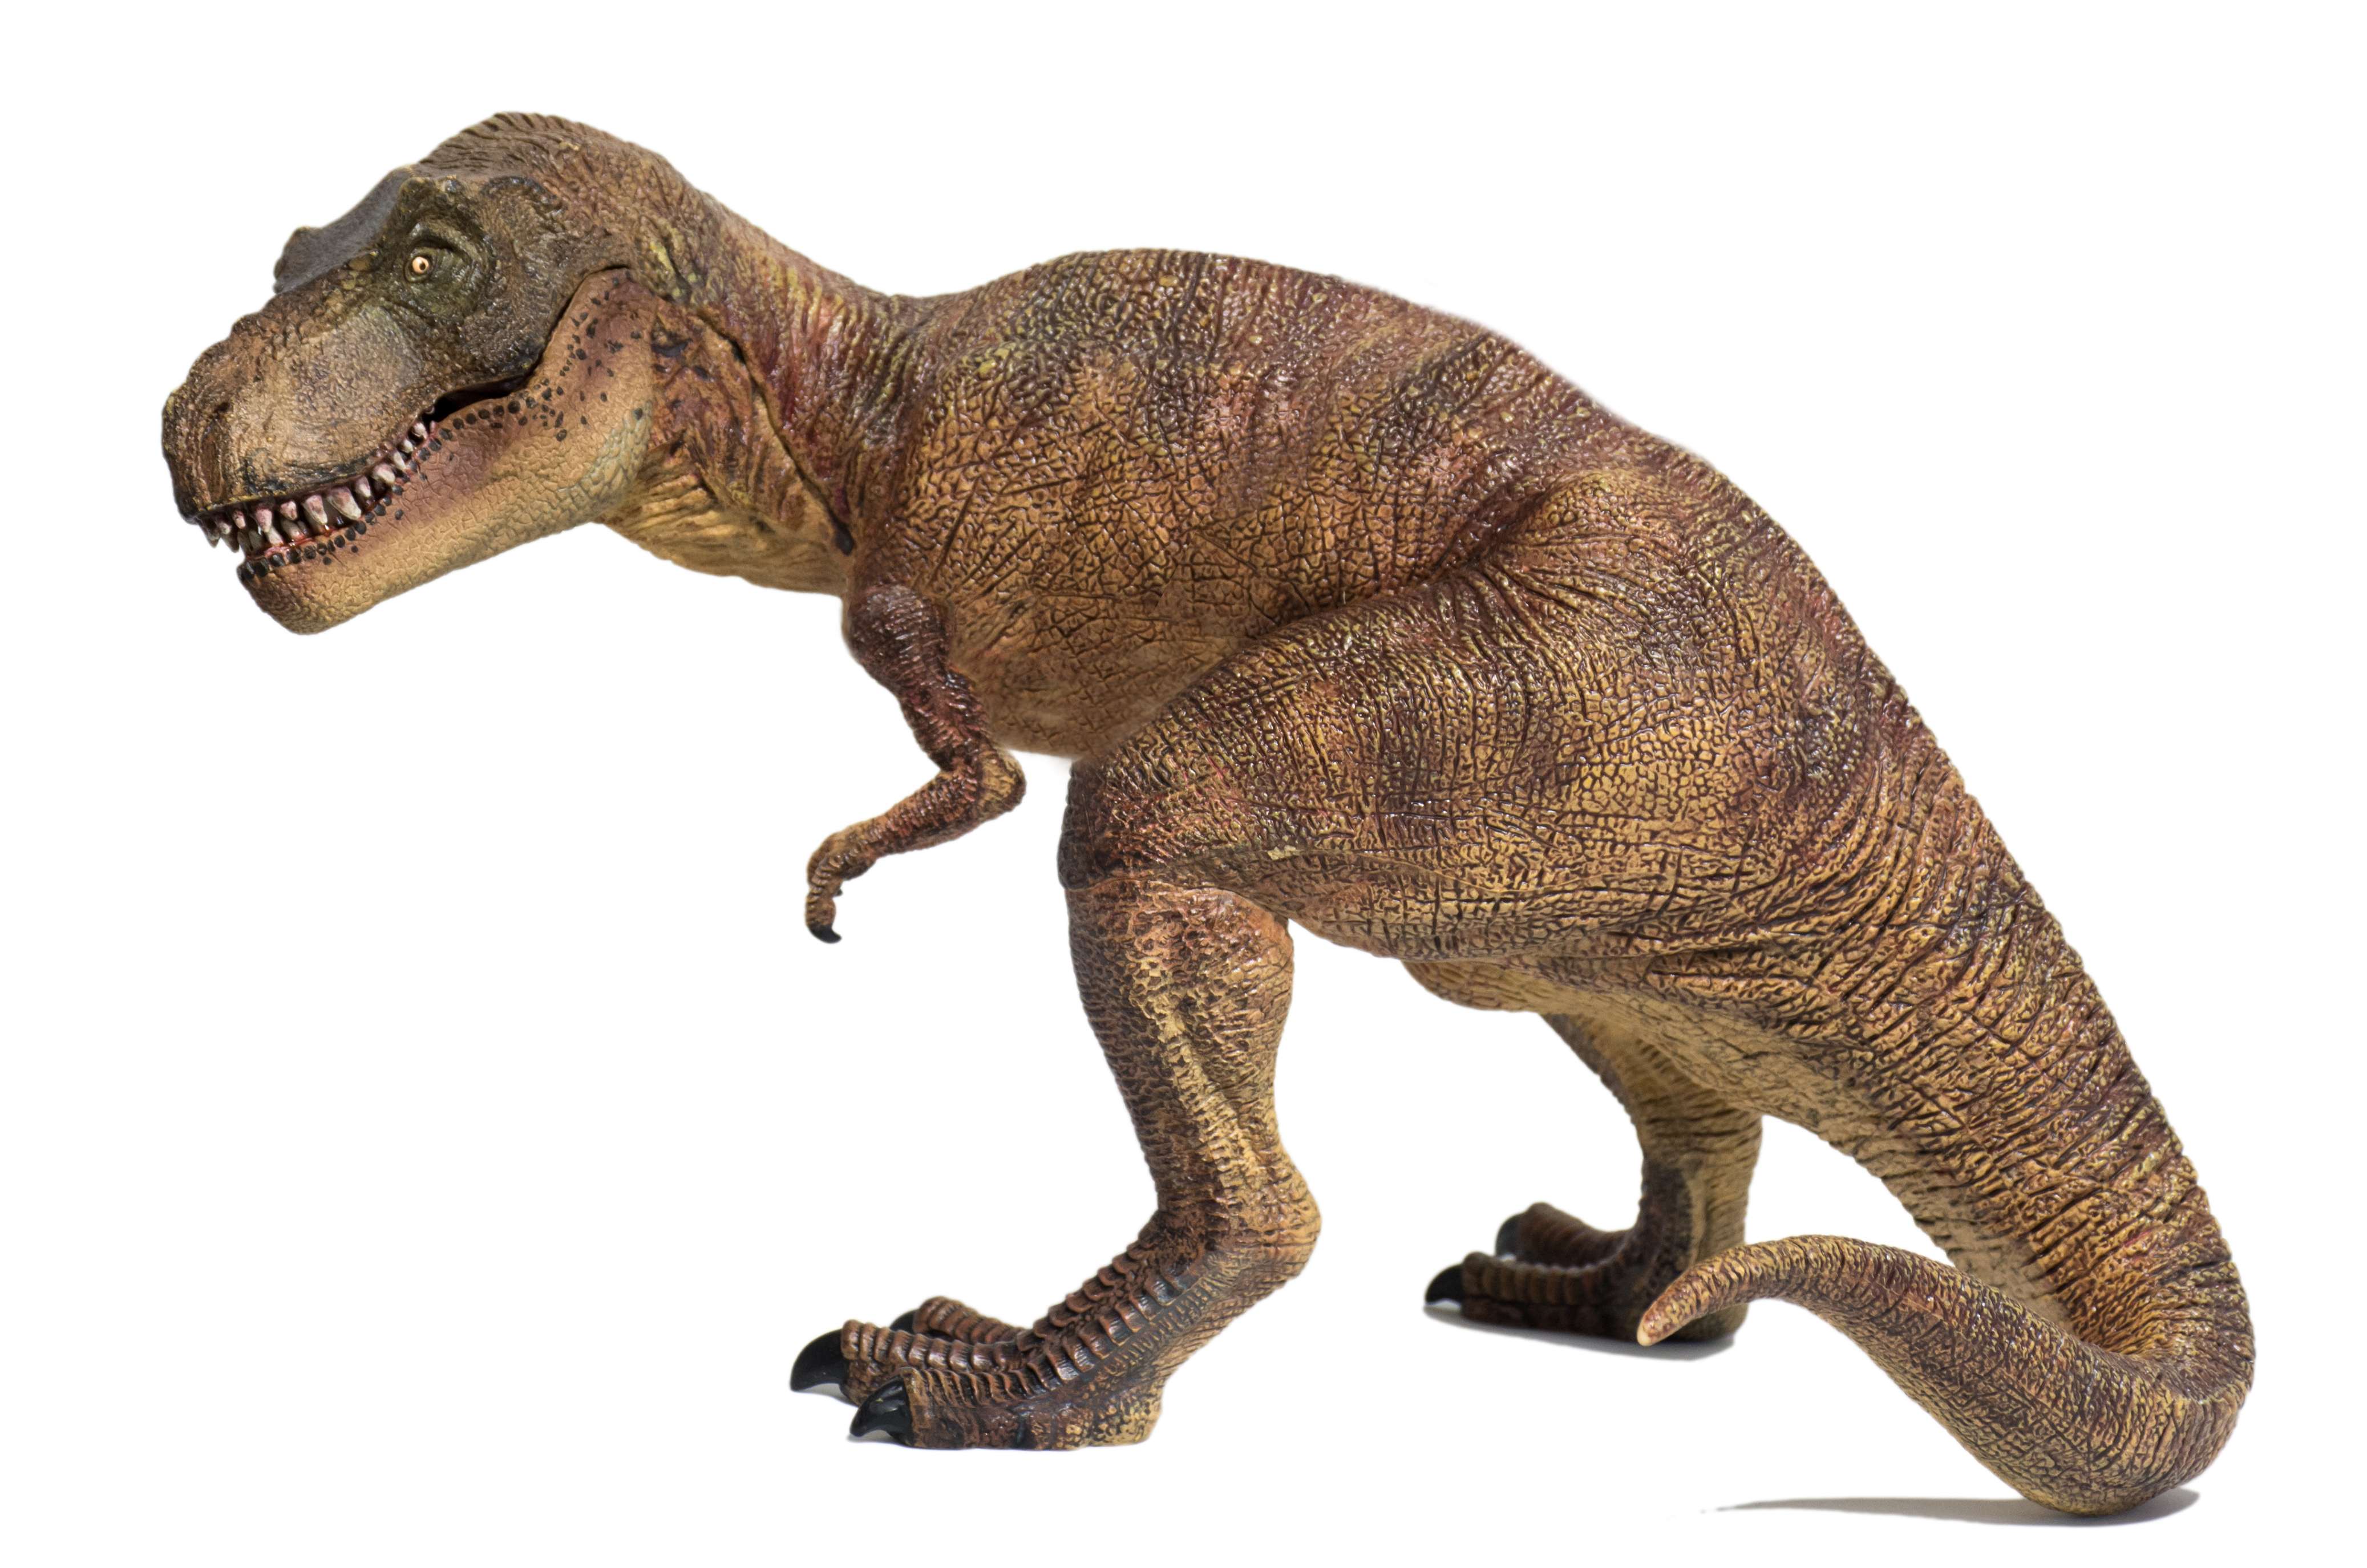 T. Rex Discoveries Reveal How the Dinosaurs Hunted, Walked, and Grew